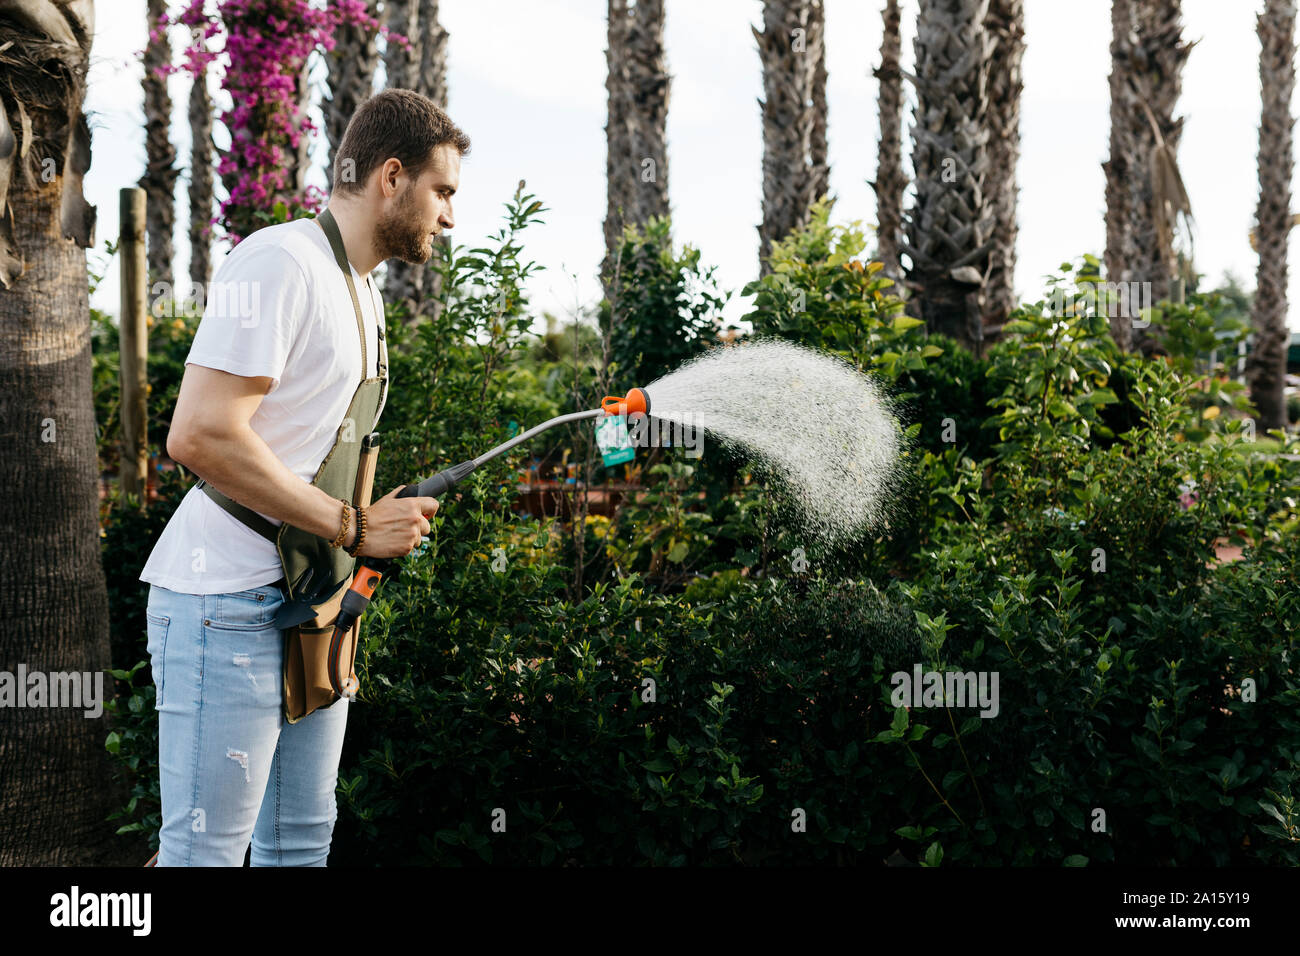 Worker of a garden center watering the plants Stock Photo